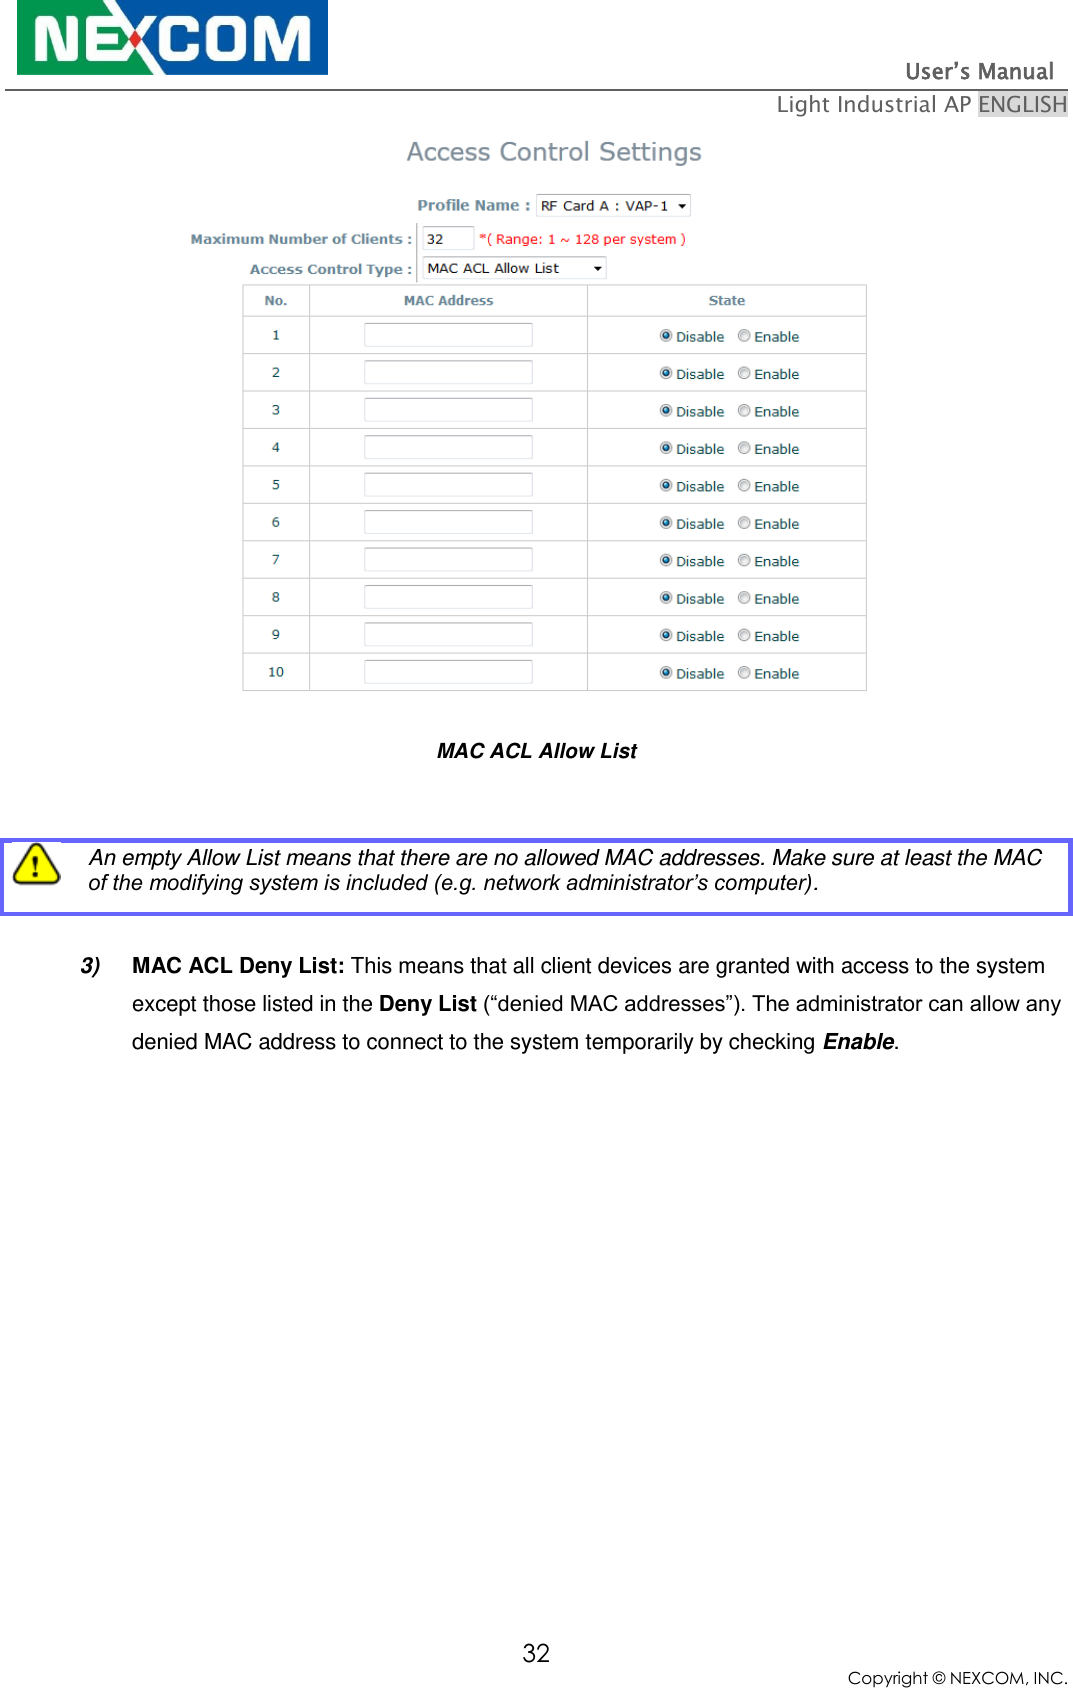                                                                          User’s Manual   Light Industrial AP ENGLISH 32 Copyright © NEXCOM, INC.  MAC ACL Allow List   An empty Allow List means that there are no allowed MAC addresses. Make sure at least the MAC of the modifying system is included (e.g. network administrator’s computer).  3) MAC ACL Deny List: This means that all client devices are granted with access to the system except those listed in the Deny List (“denied MAC addresses”). The administrator can allow any denied MAC address to connect to the system temporarily by checking Enable. 